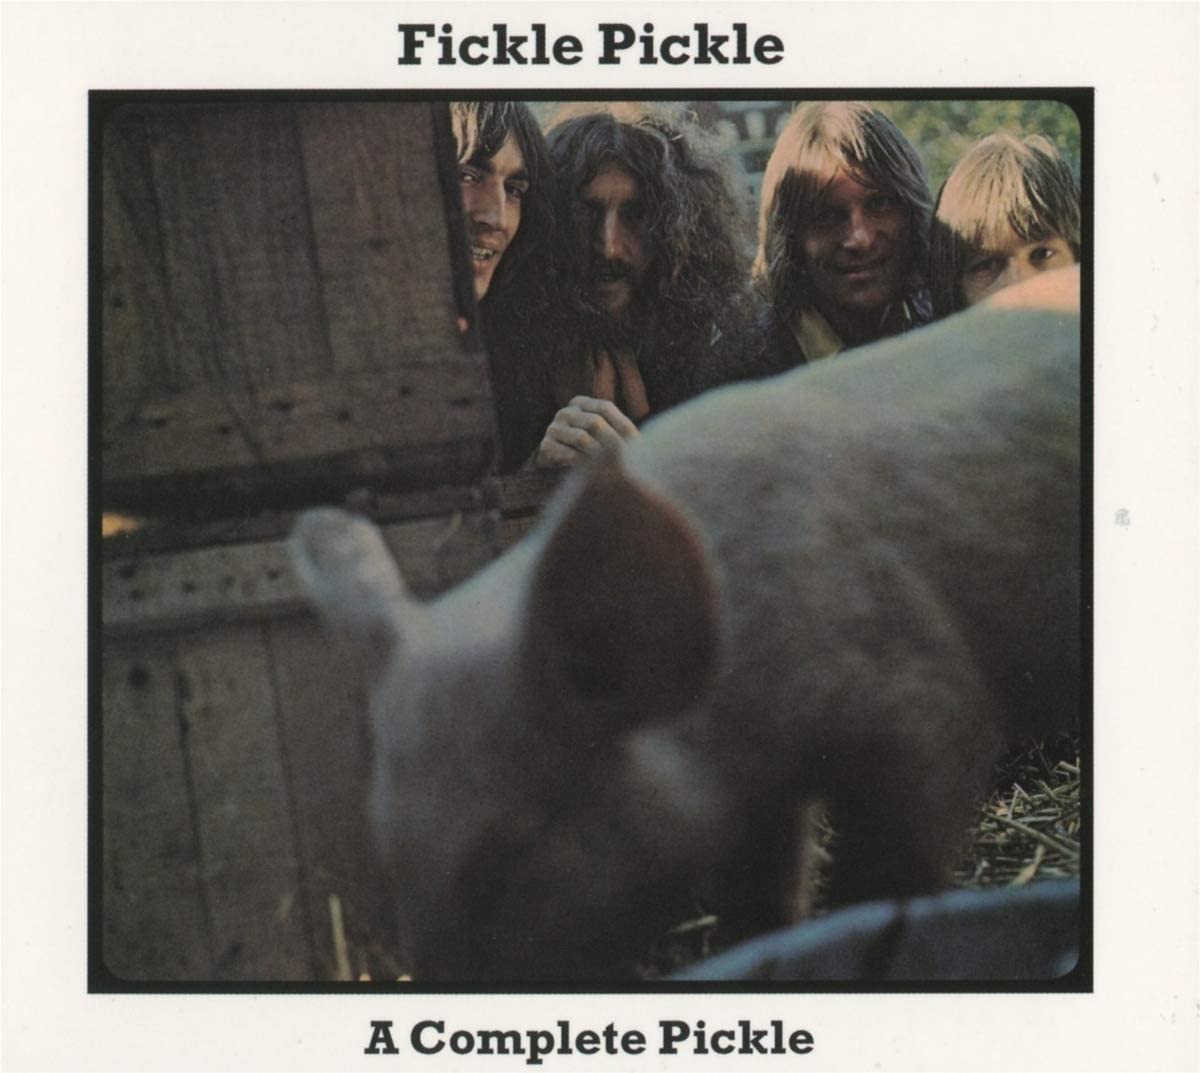 Fickle Pickle/A Complete Pickle (3CD) [CD]